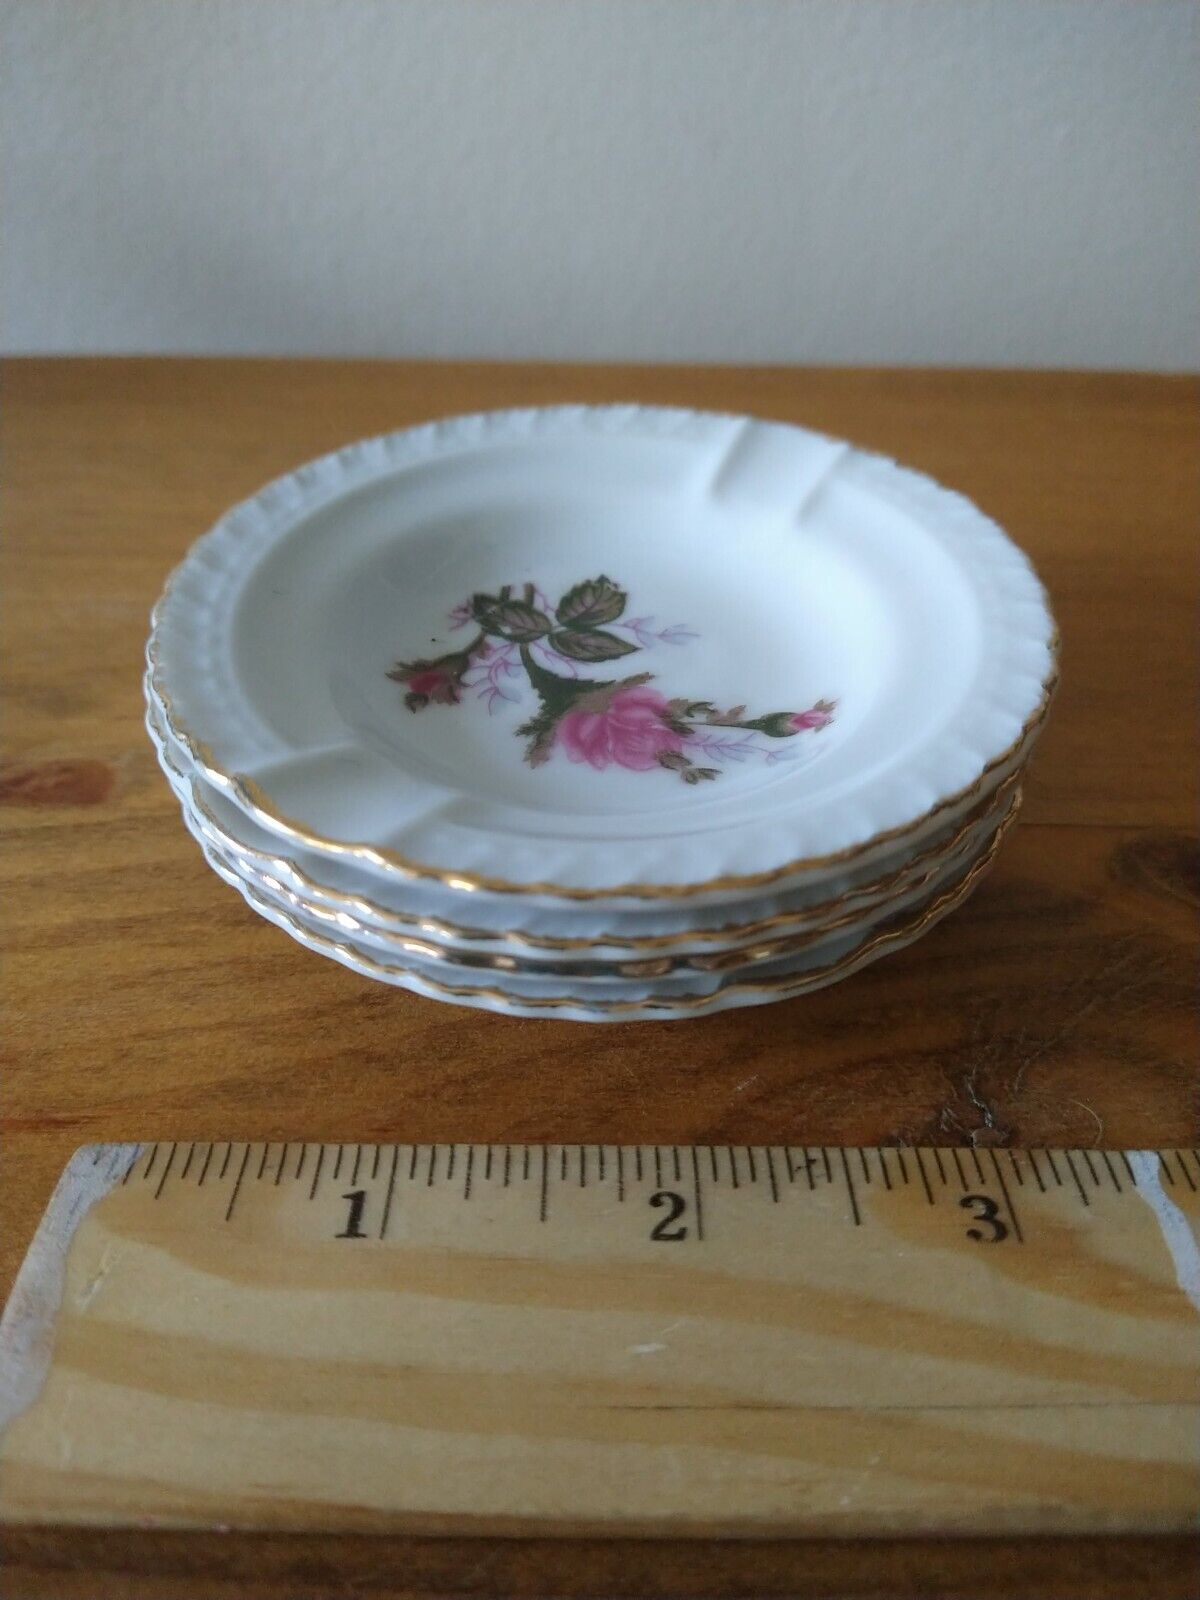 (4) Vintage Moss Rose Small China Round Ashtray With Gold Trim Made in Japan